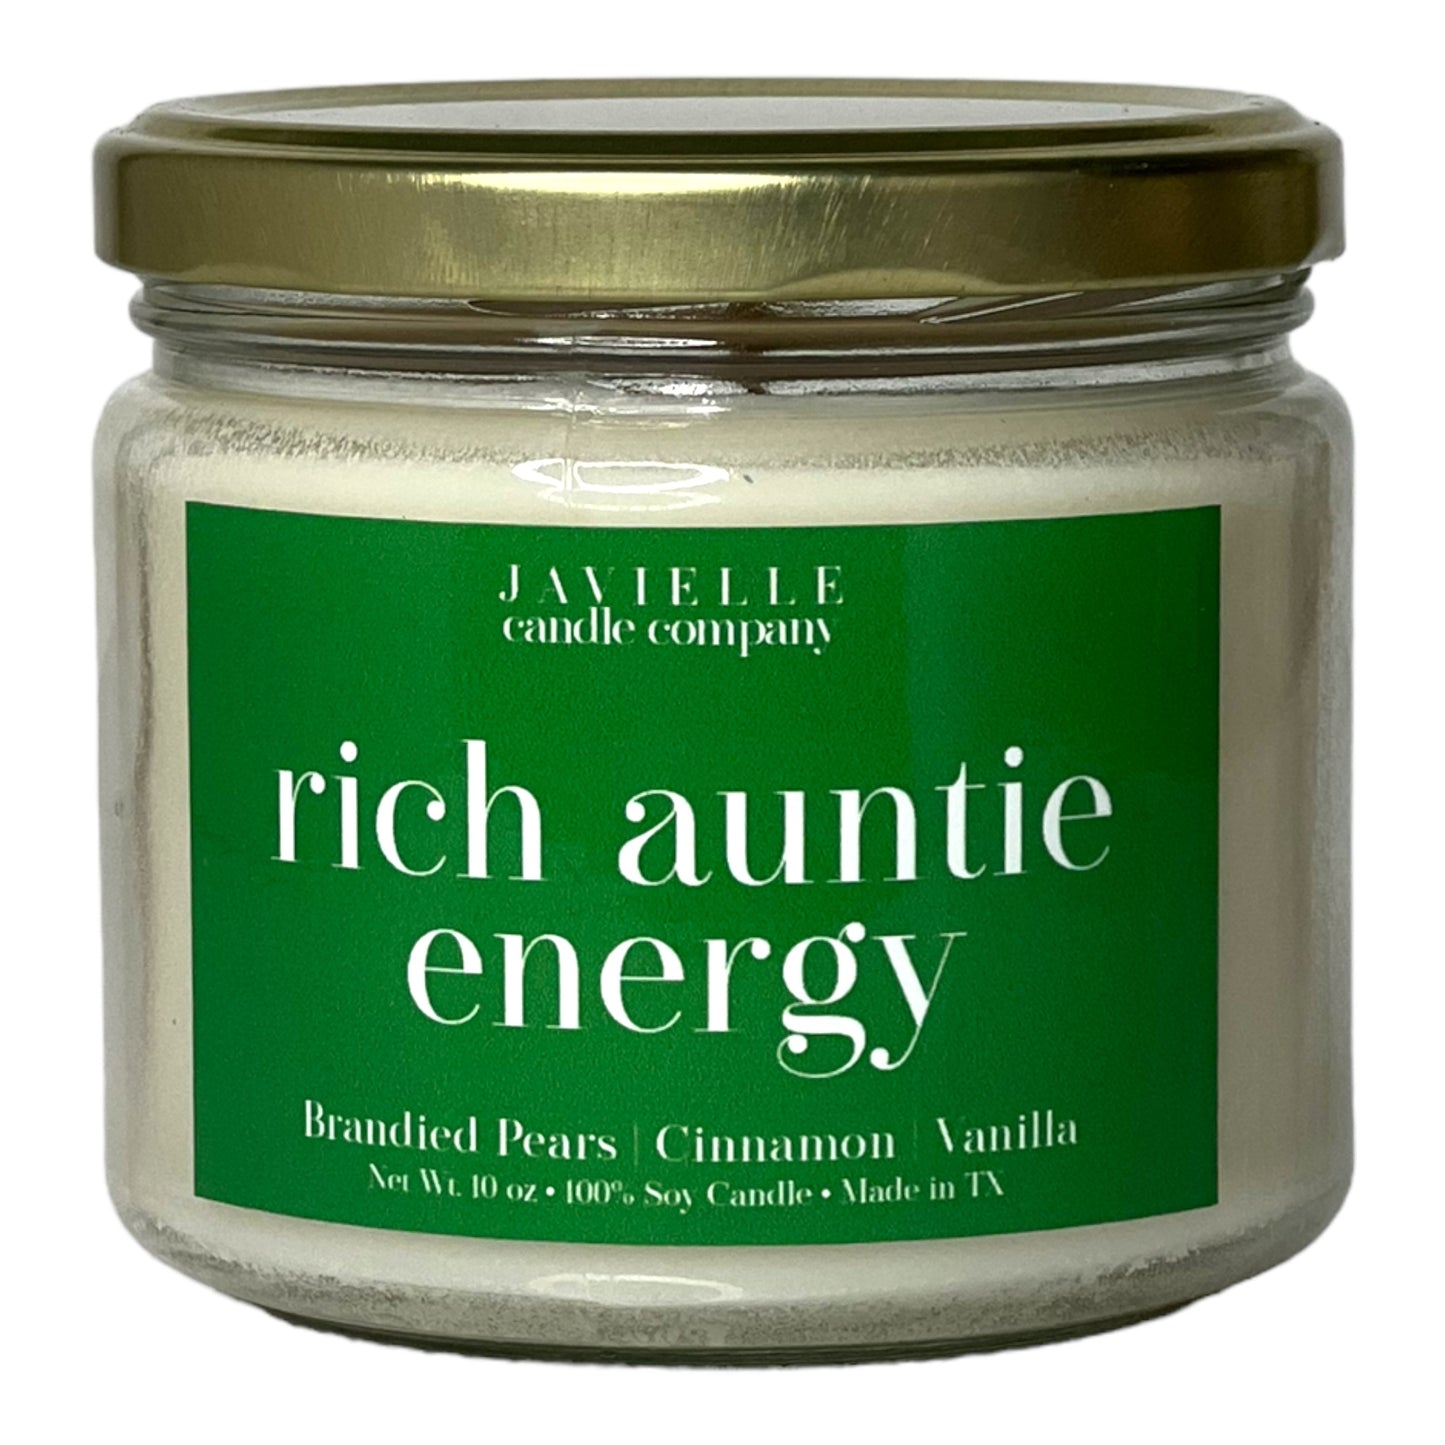 Rich Auntie Energy Soy Candle